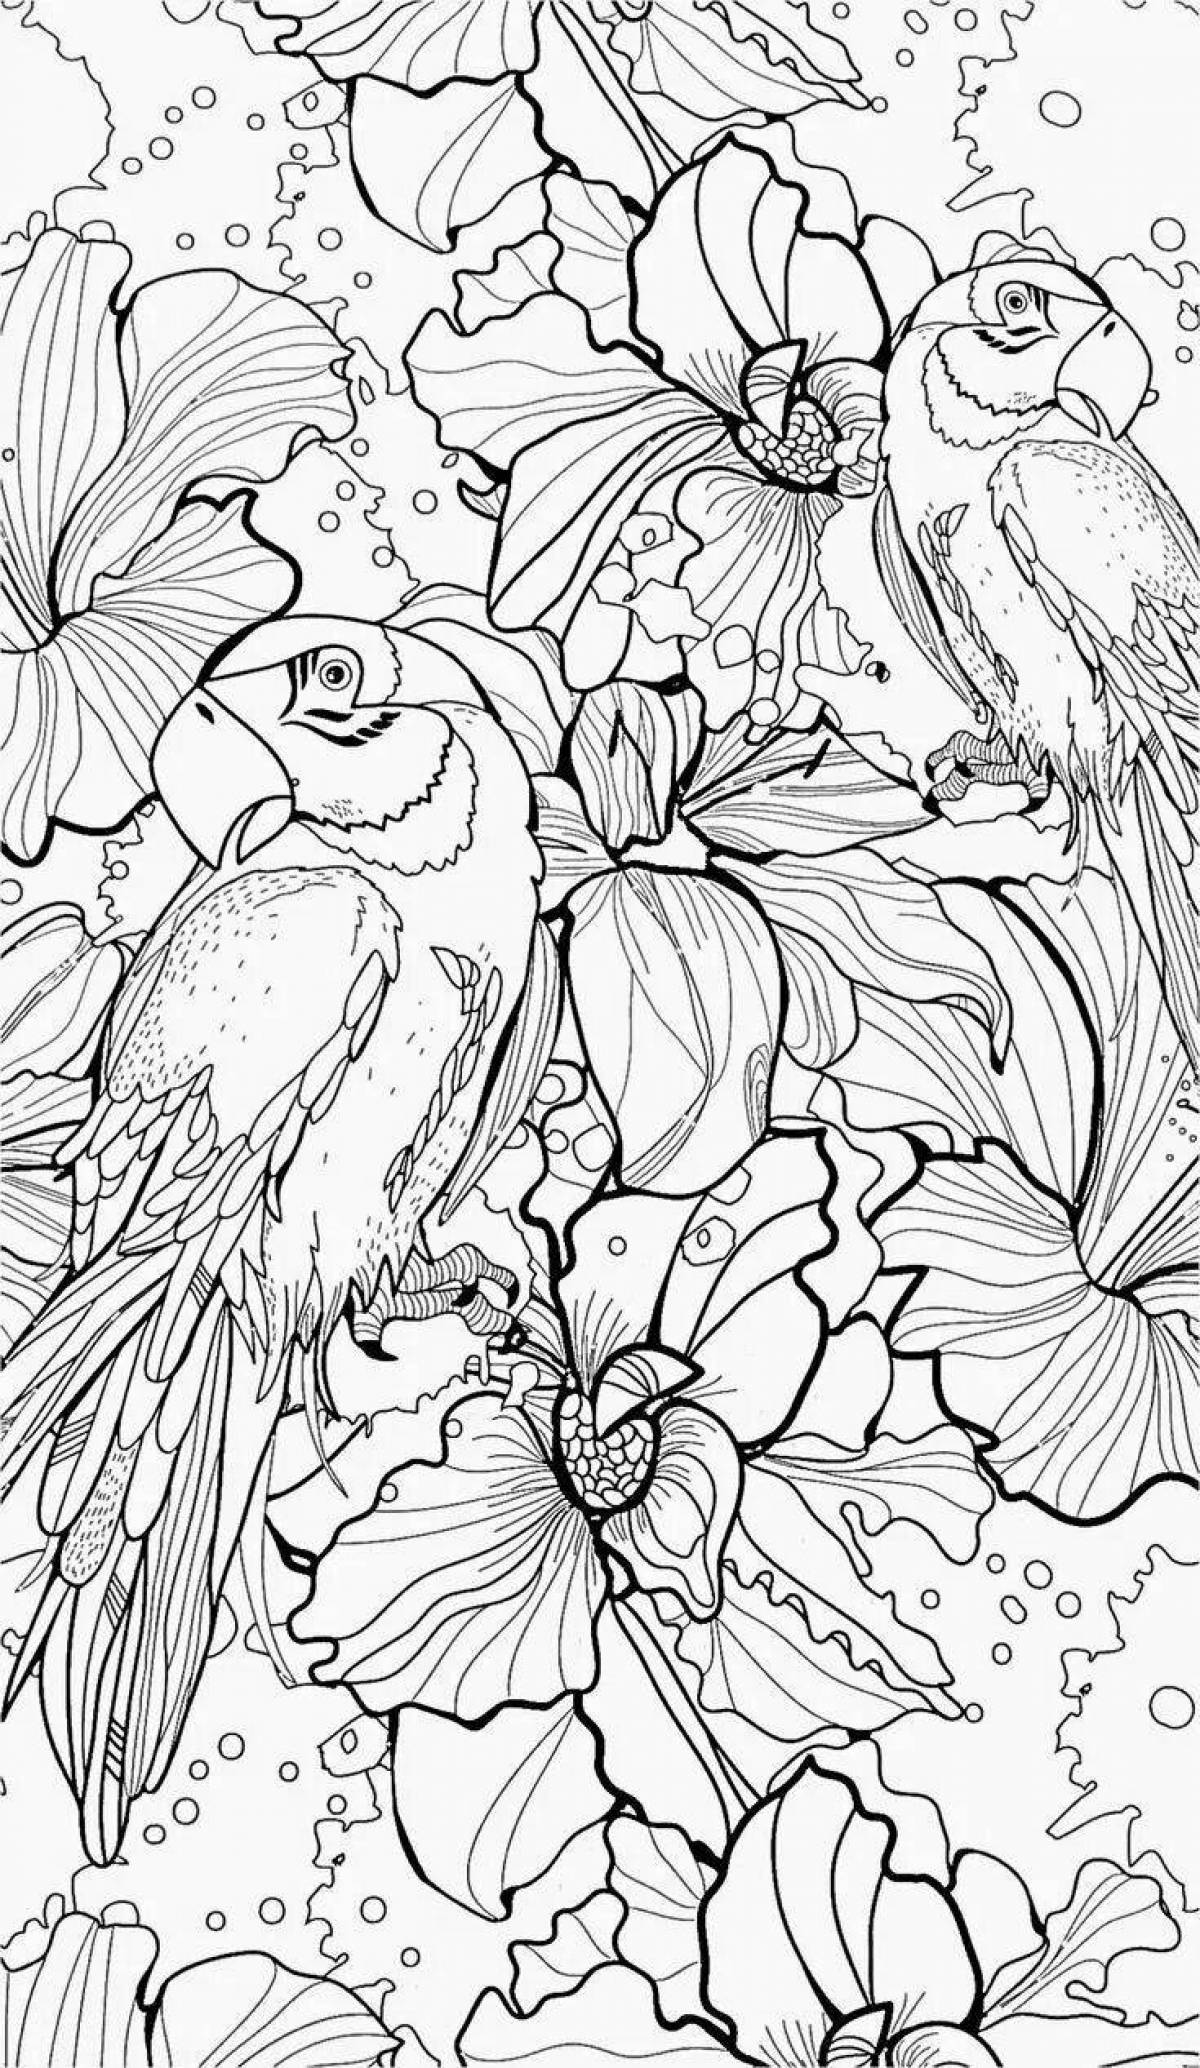 Detailed coloring by numbers for adults